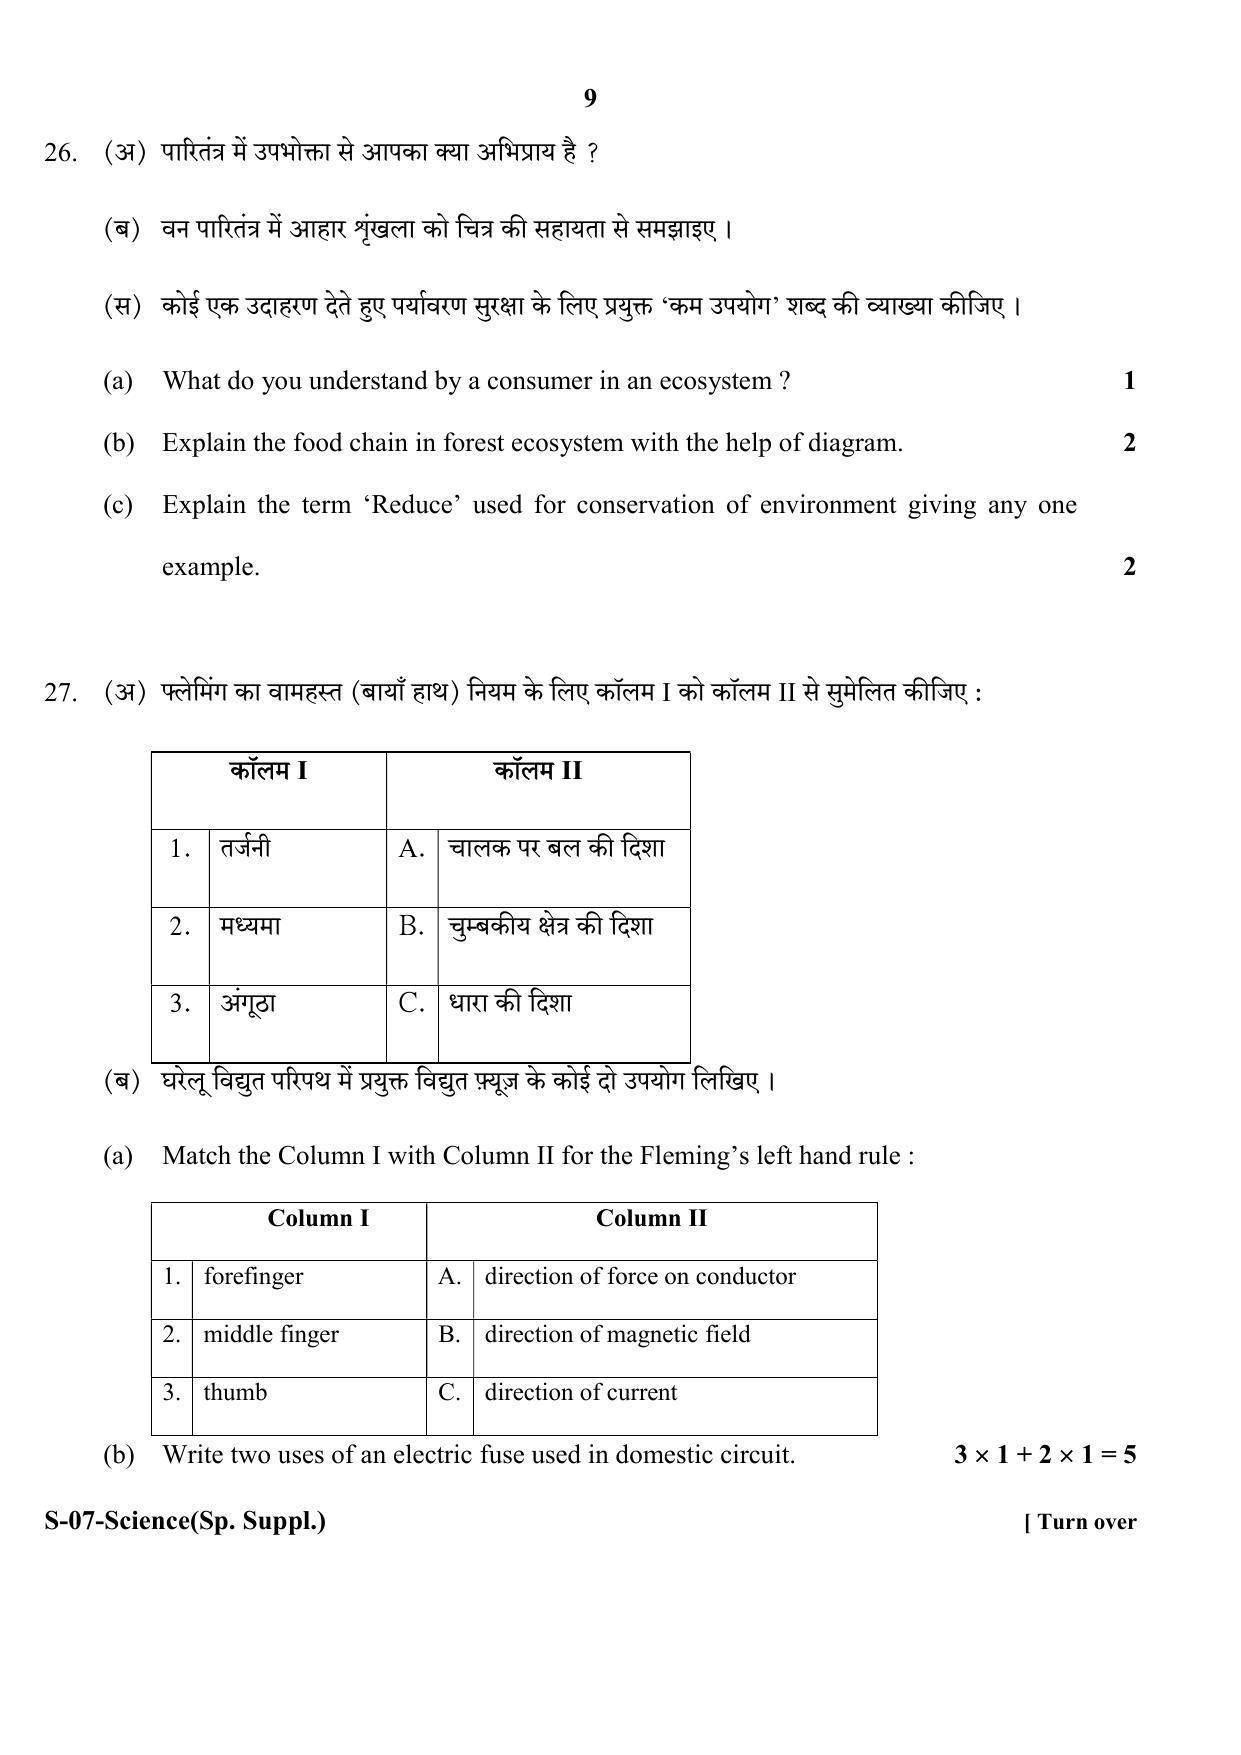 RBSE Class 10 Science ( supplementary) 2017 Question Paper - Page 9